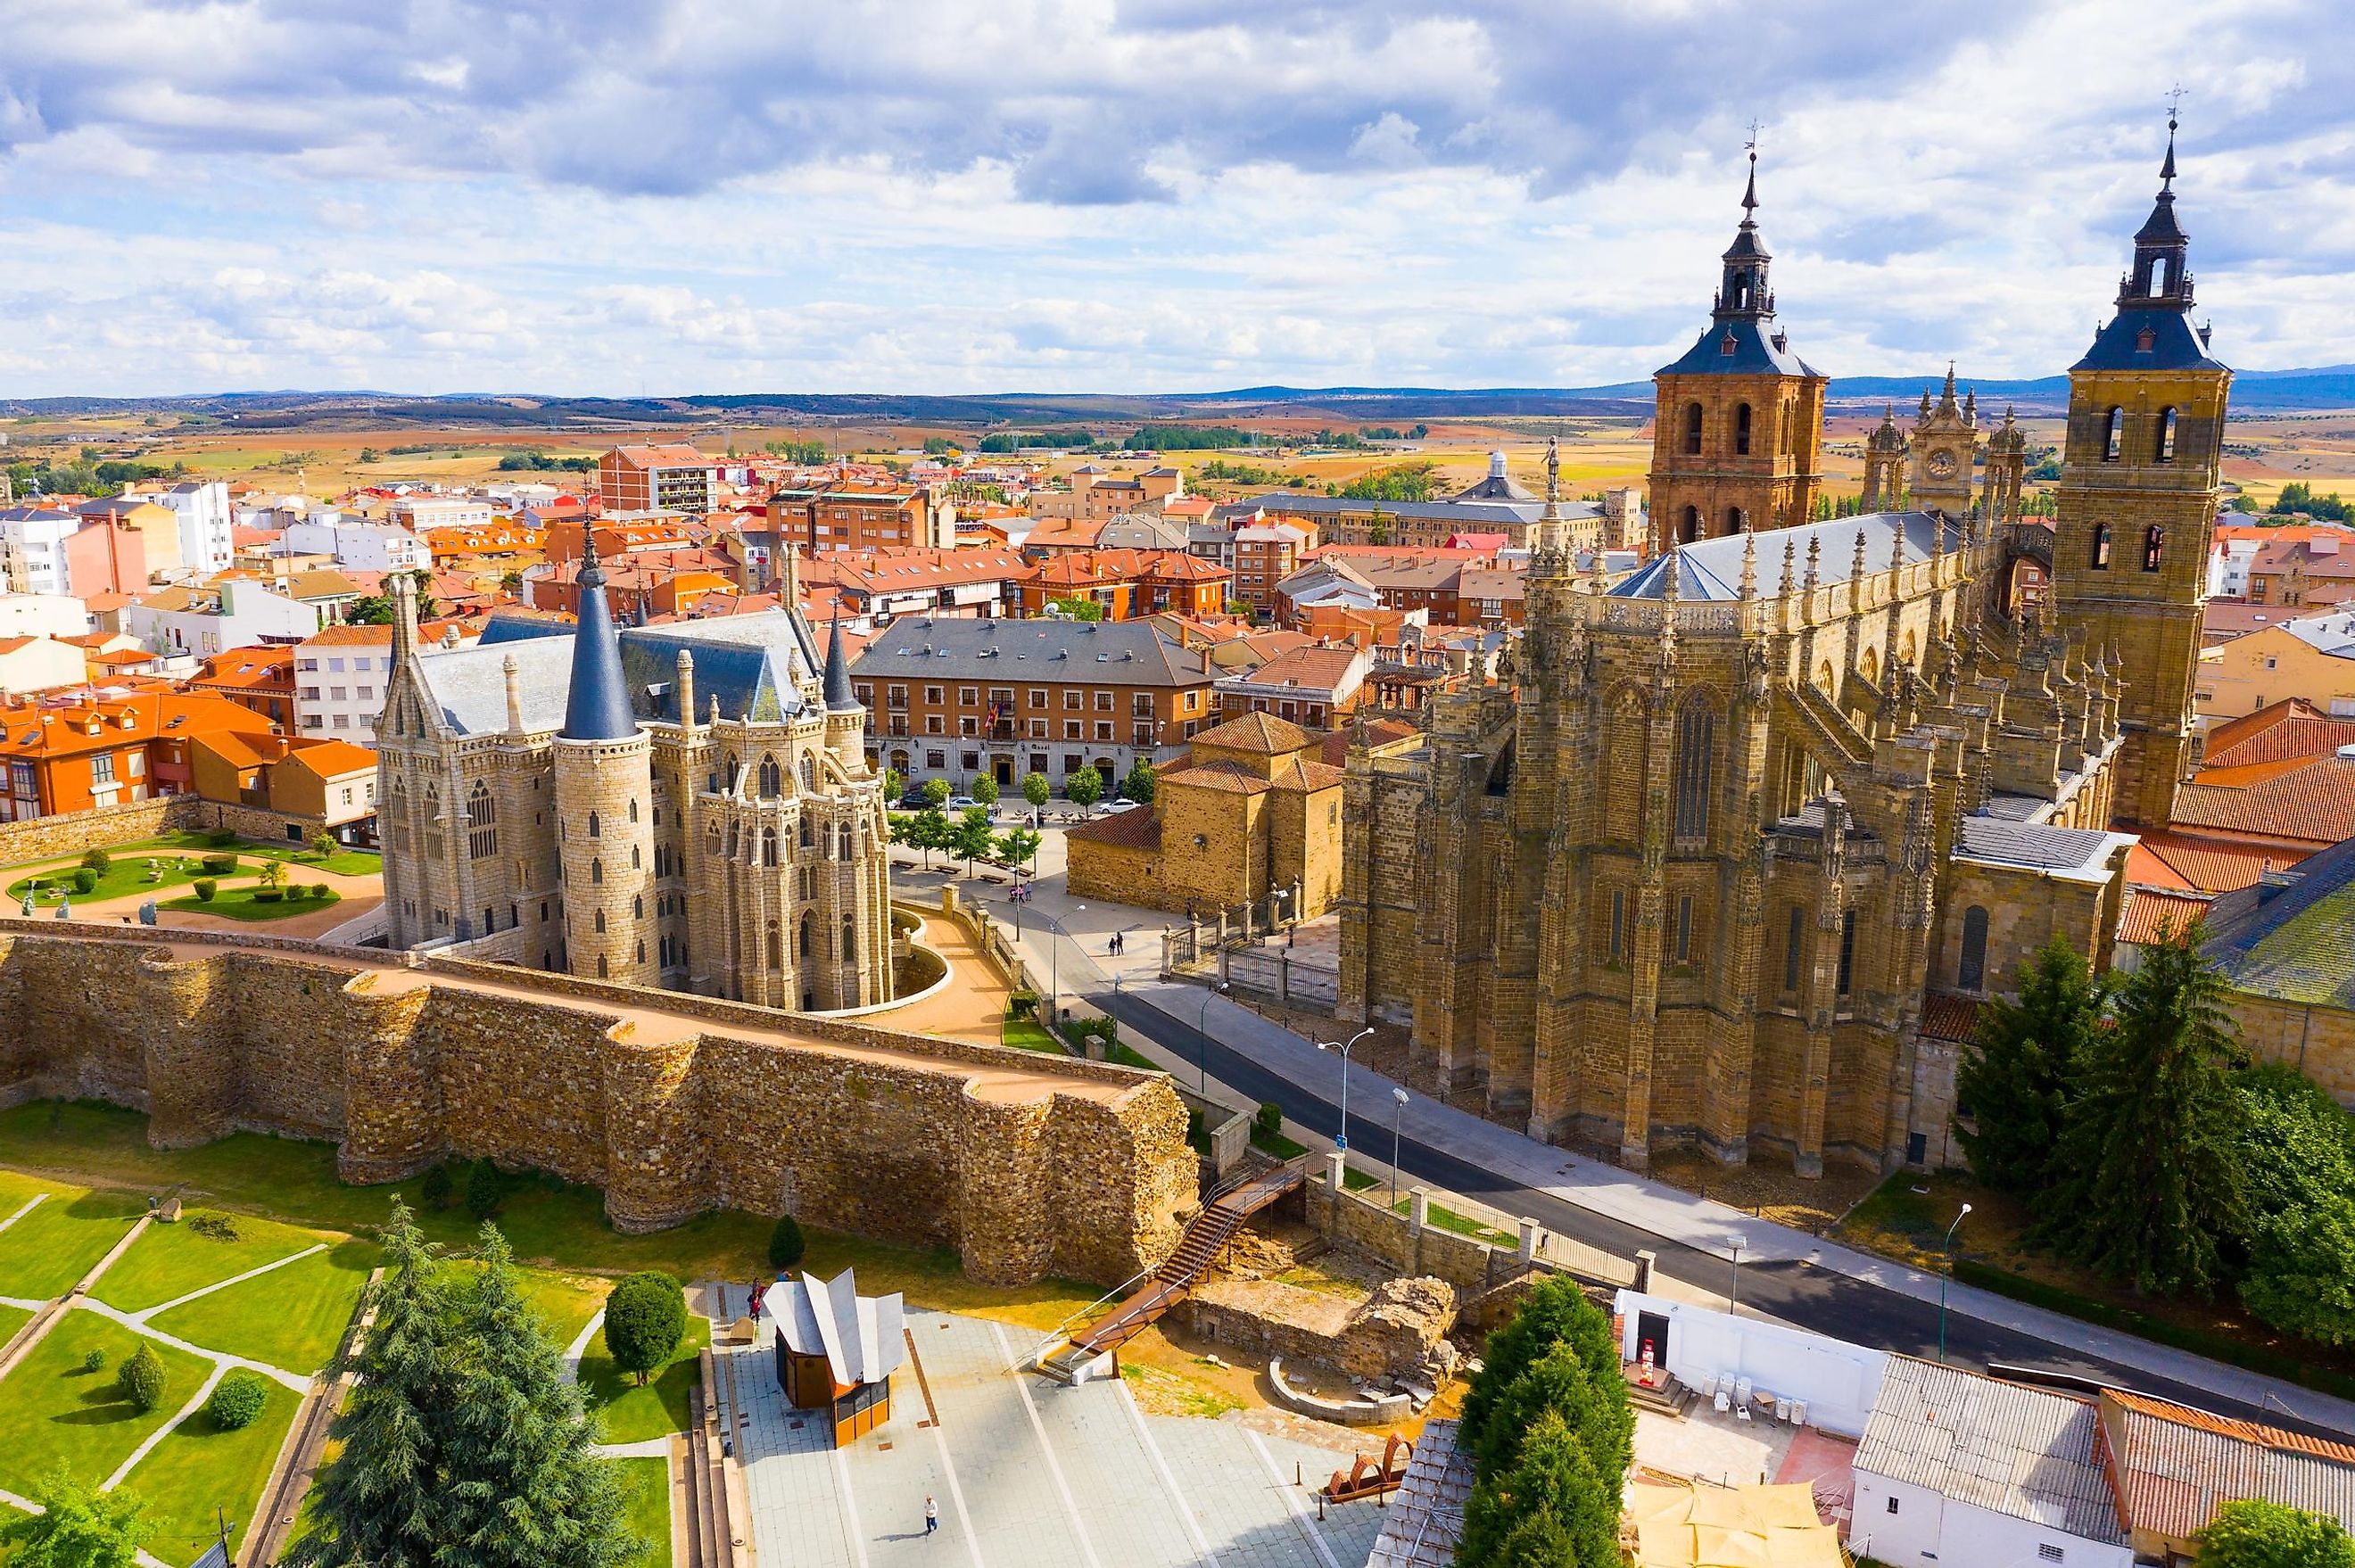 A massive Spanish cathedral (Santa Maria Cathedral) stands to the right of the quirky Episcopal Palace designed by Antonio Gaudi. The town of Astorga resides in the backdrop, as does the wide open Northwestern Spanish countryside. Clouds loom overhead.